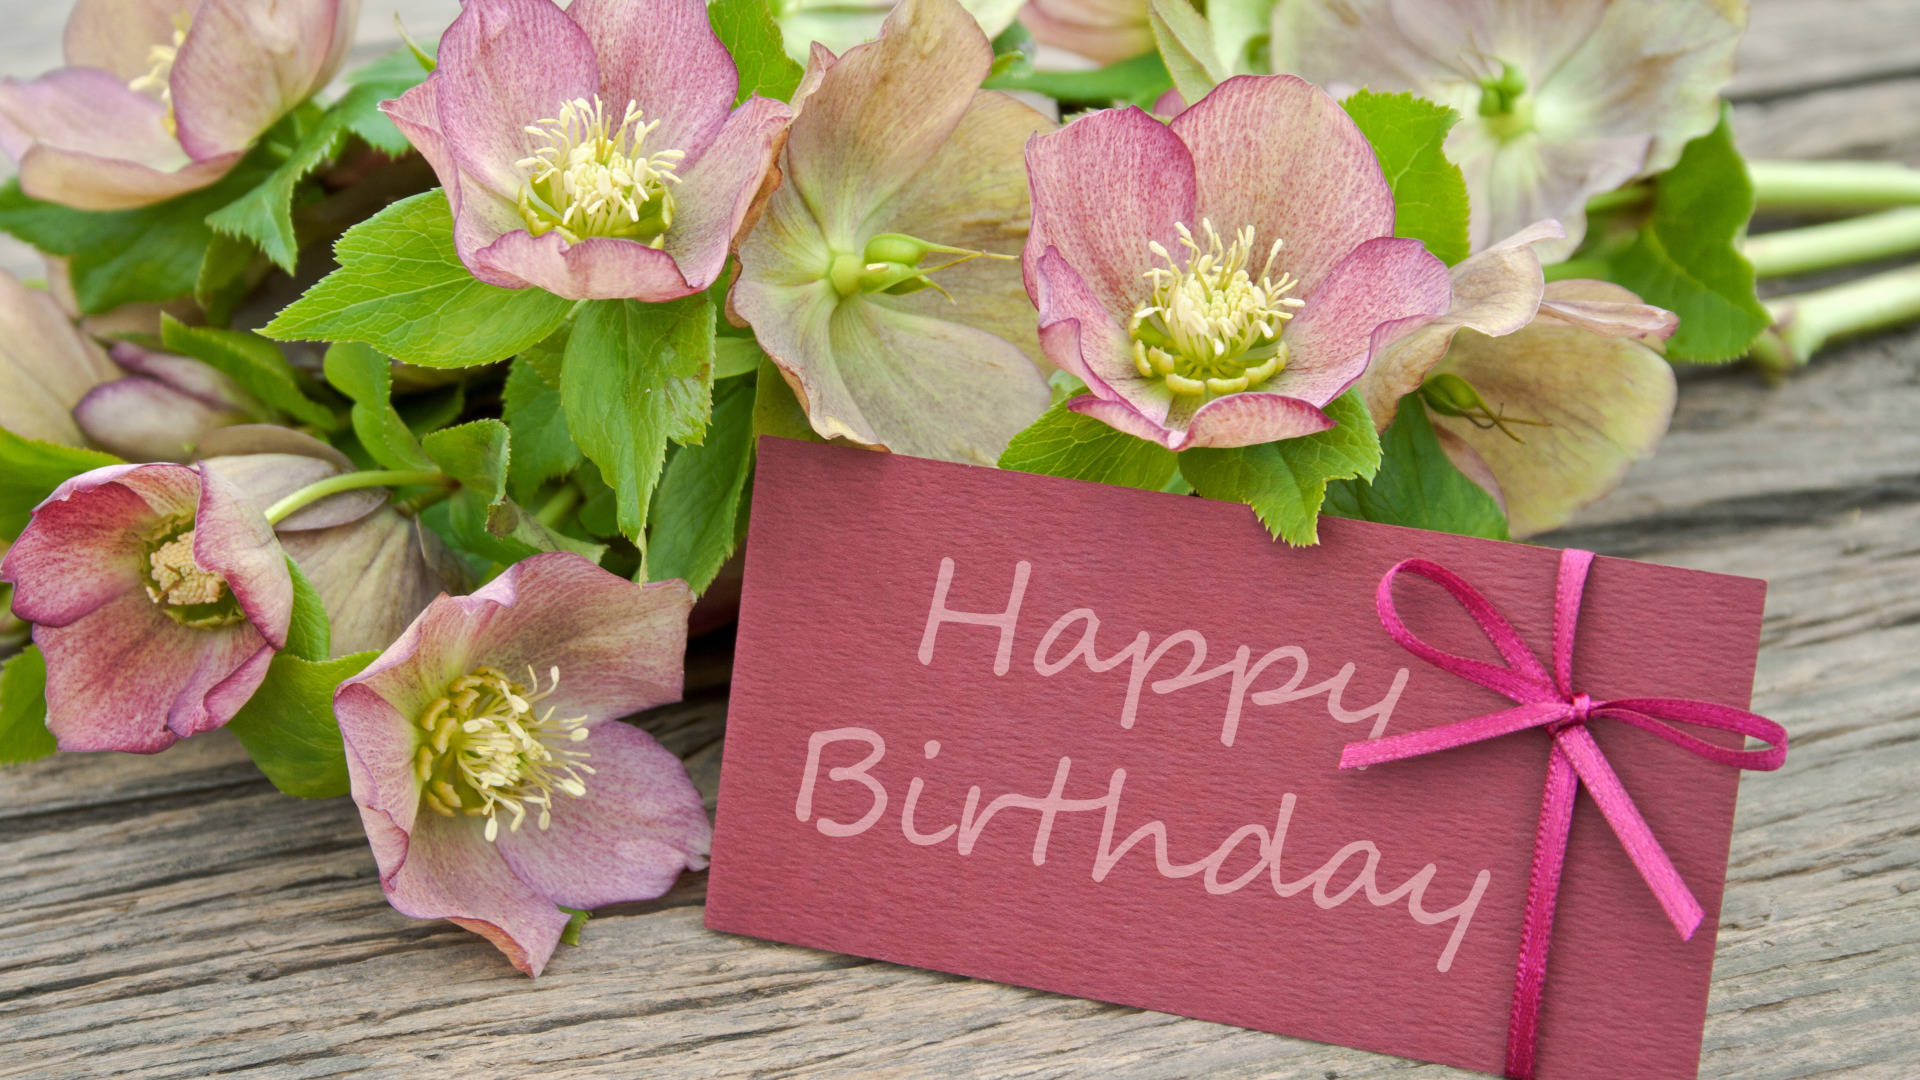 Download Happy Birthday Flower With Greeting Card Wallpaper